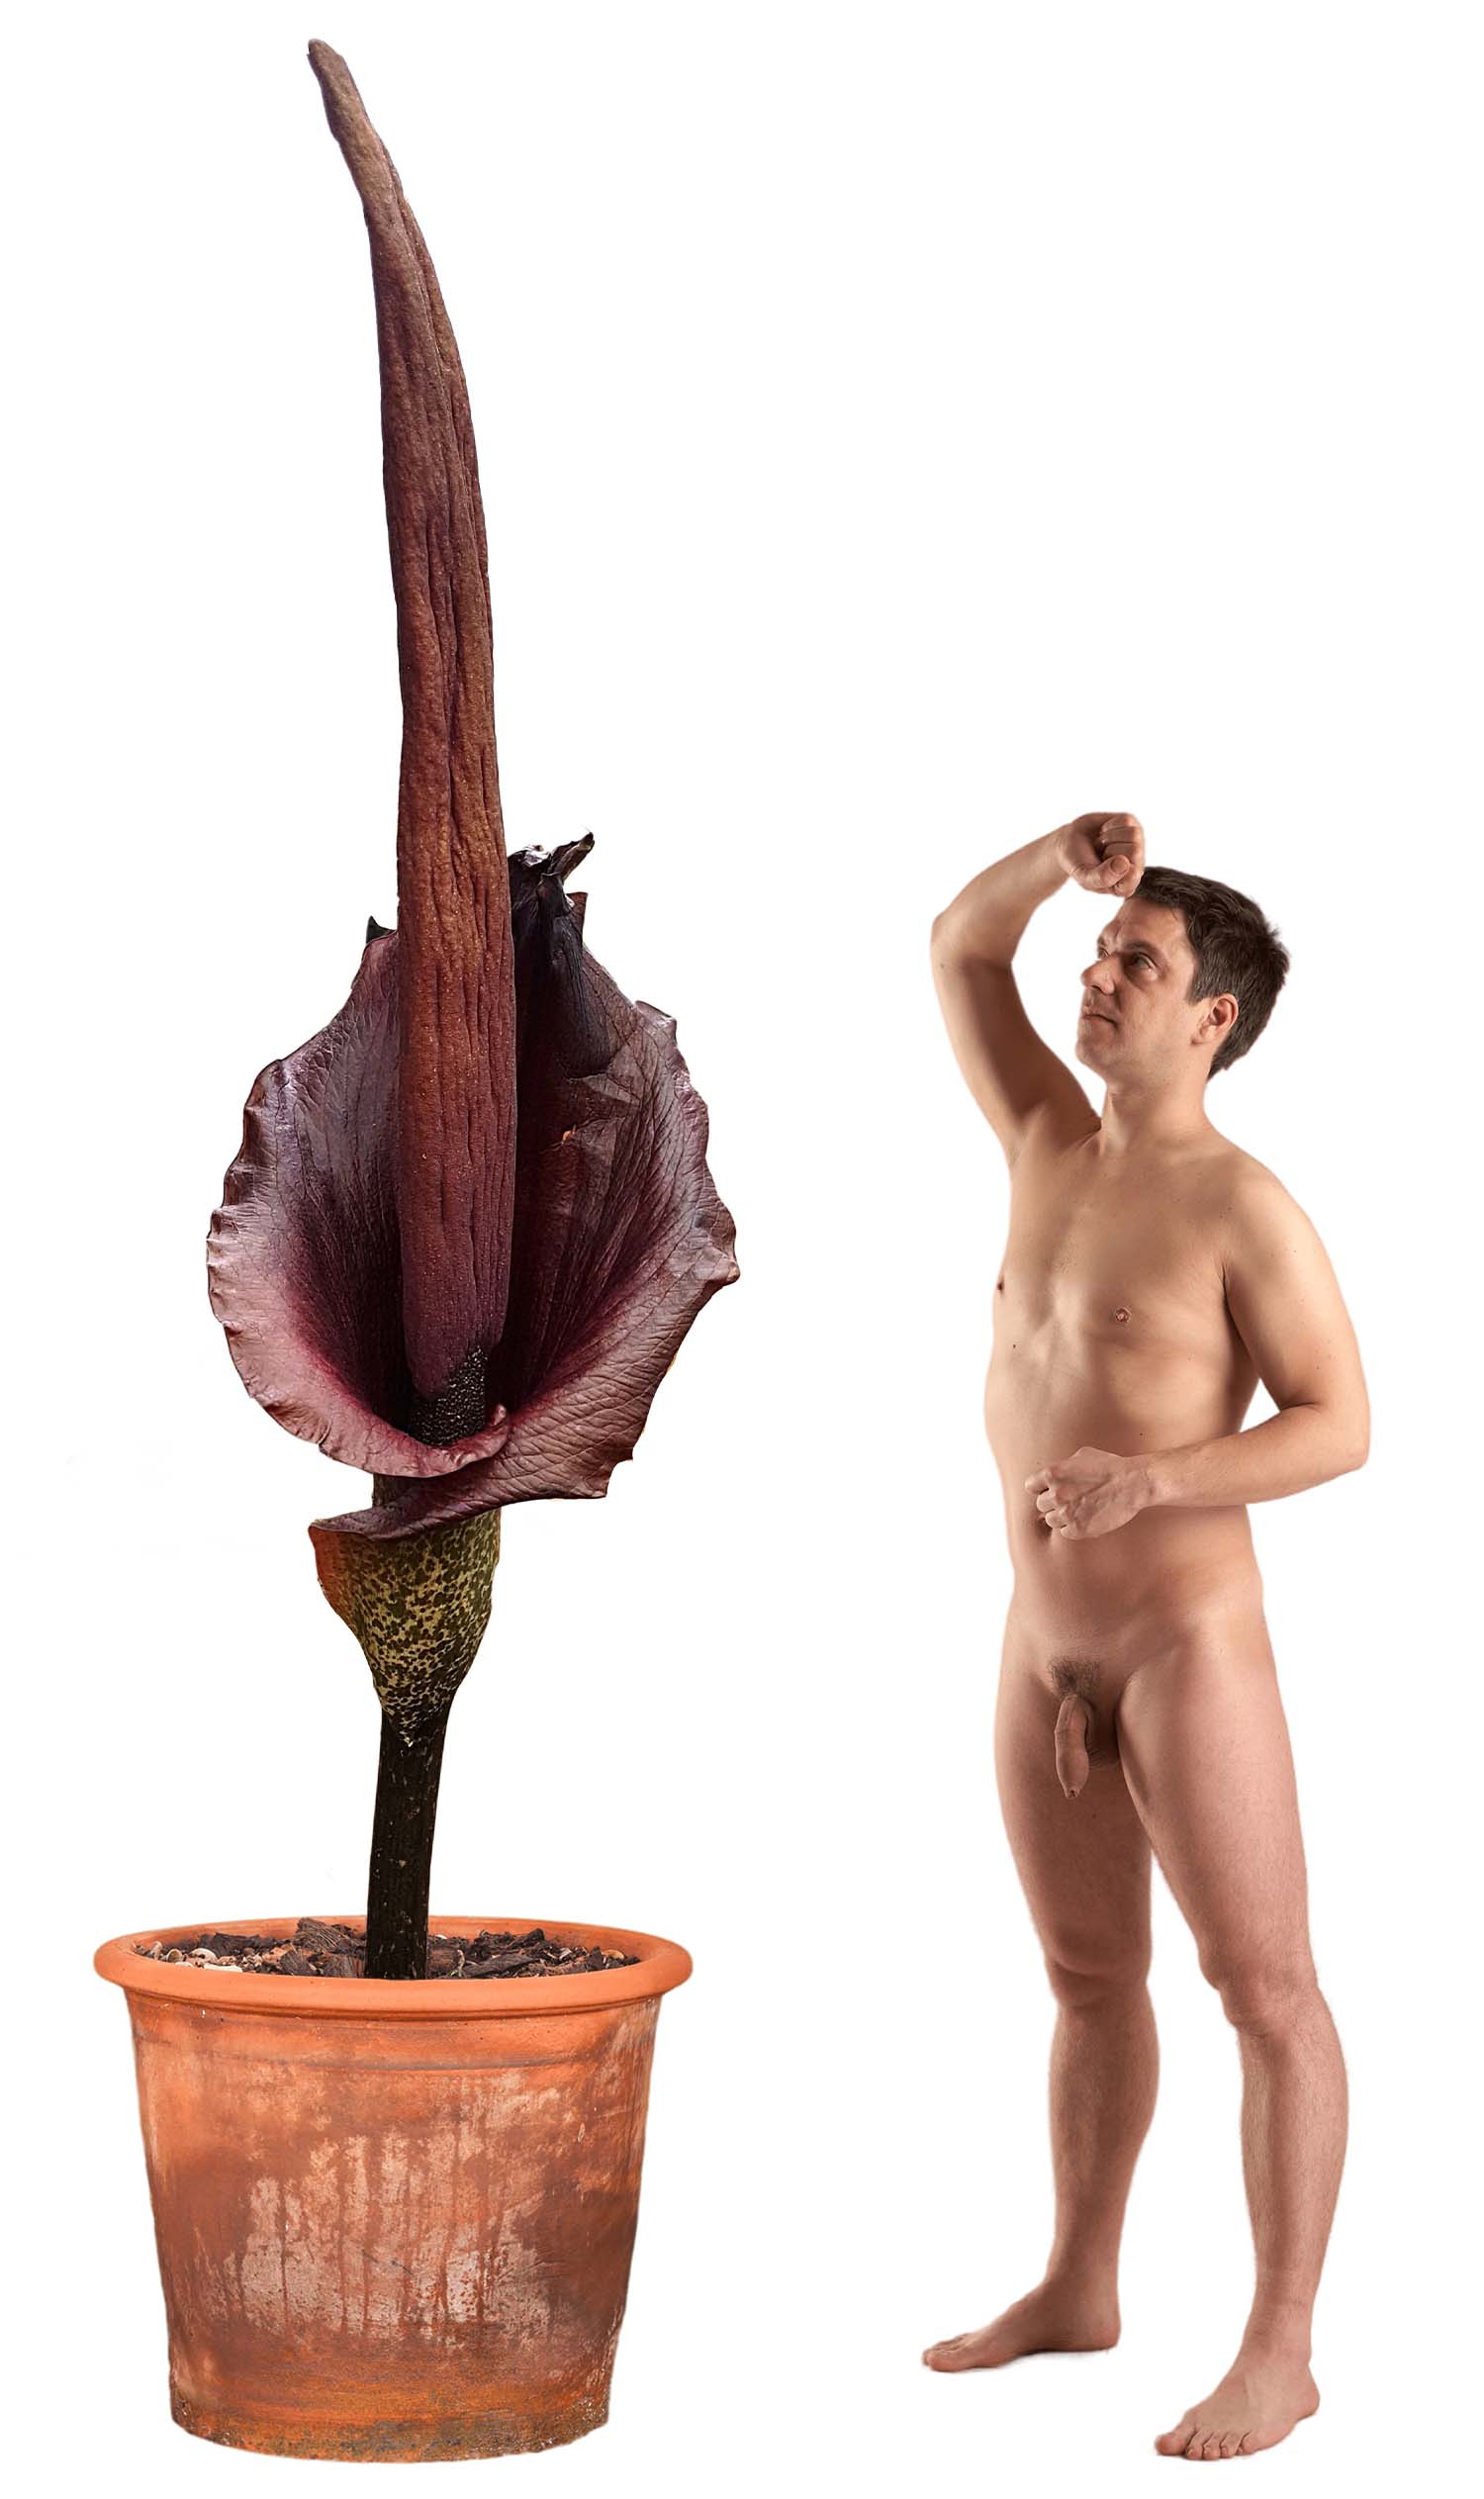 The phallus-like shape of the spadix is a characteristic of many plants in the Amorphophallus genus, which includes the Amorphophallus titanum, also known as the "corpse flower."